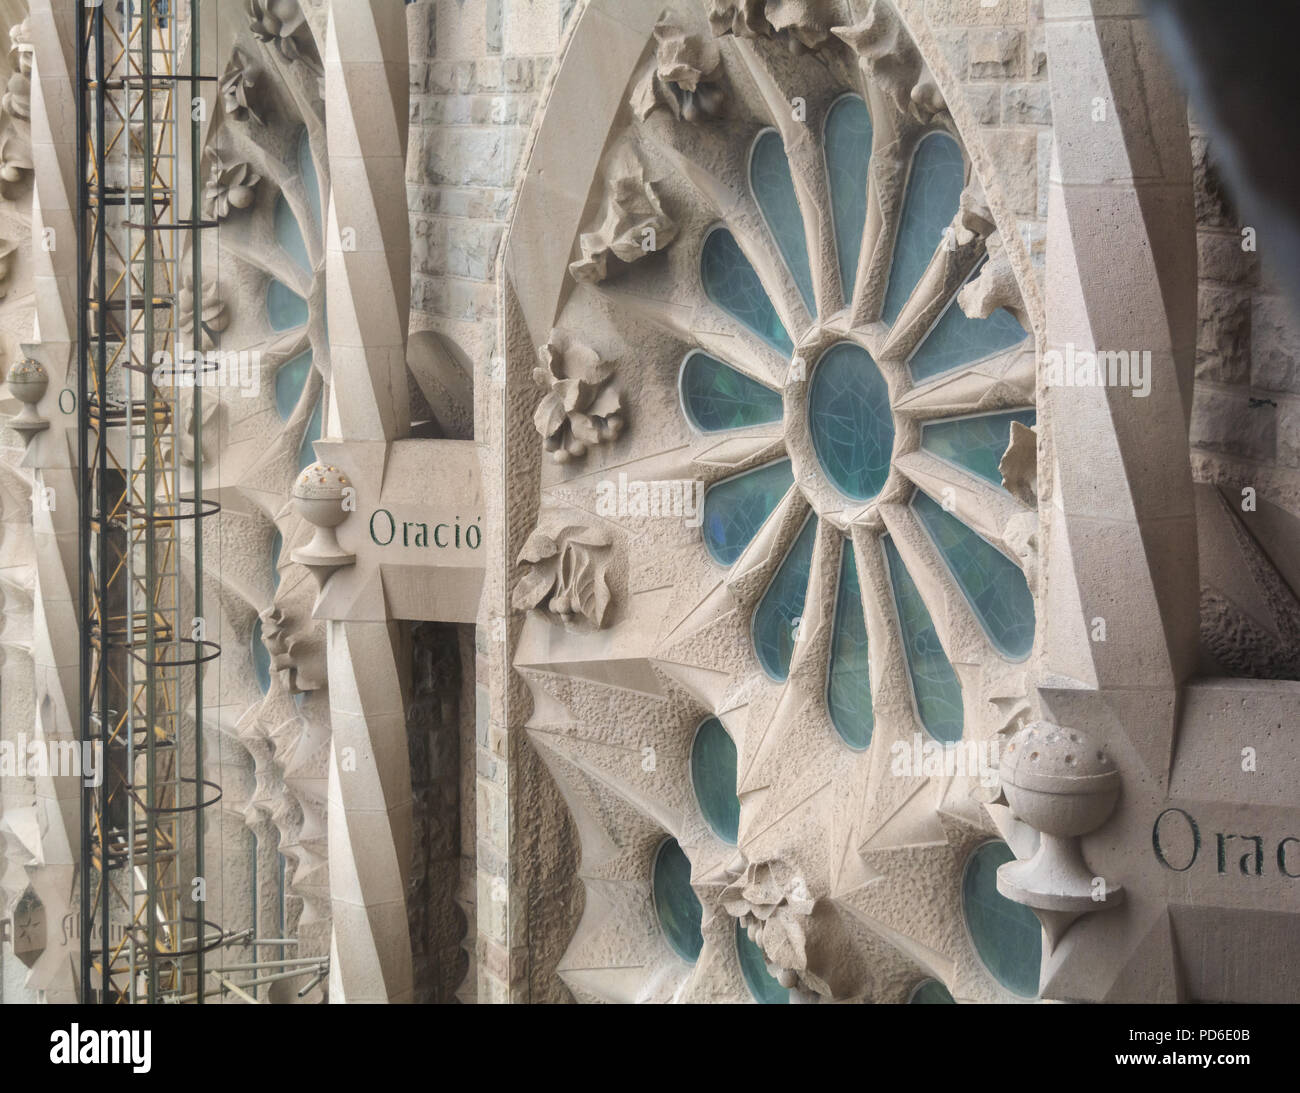 Barcelona, Spain - May 9, 2018: Exterior element - stained glass window - of the Sagrada Familia, large unfinished Roman Catholic church in Barcelona, Stock Photo